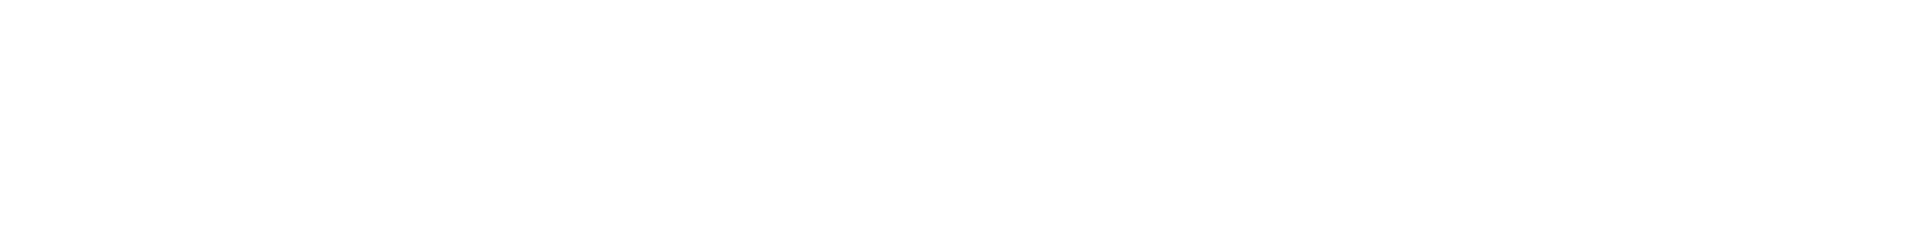 A green and white background with some type of paint